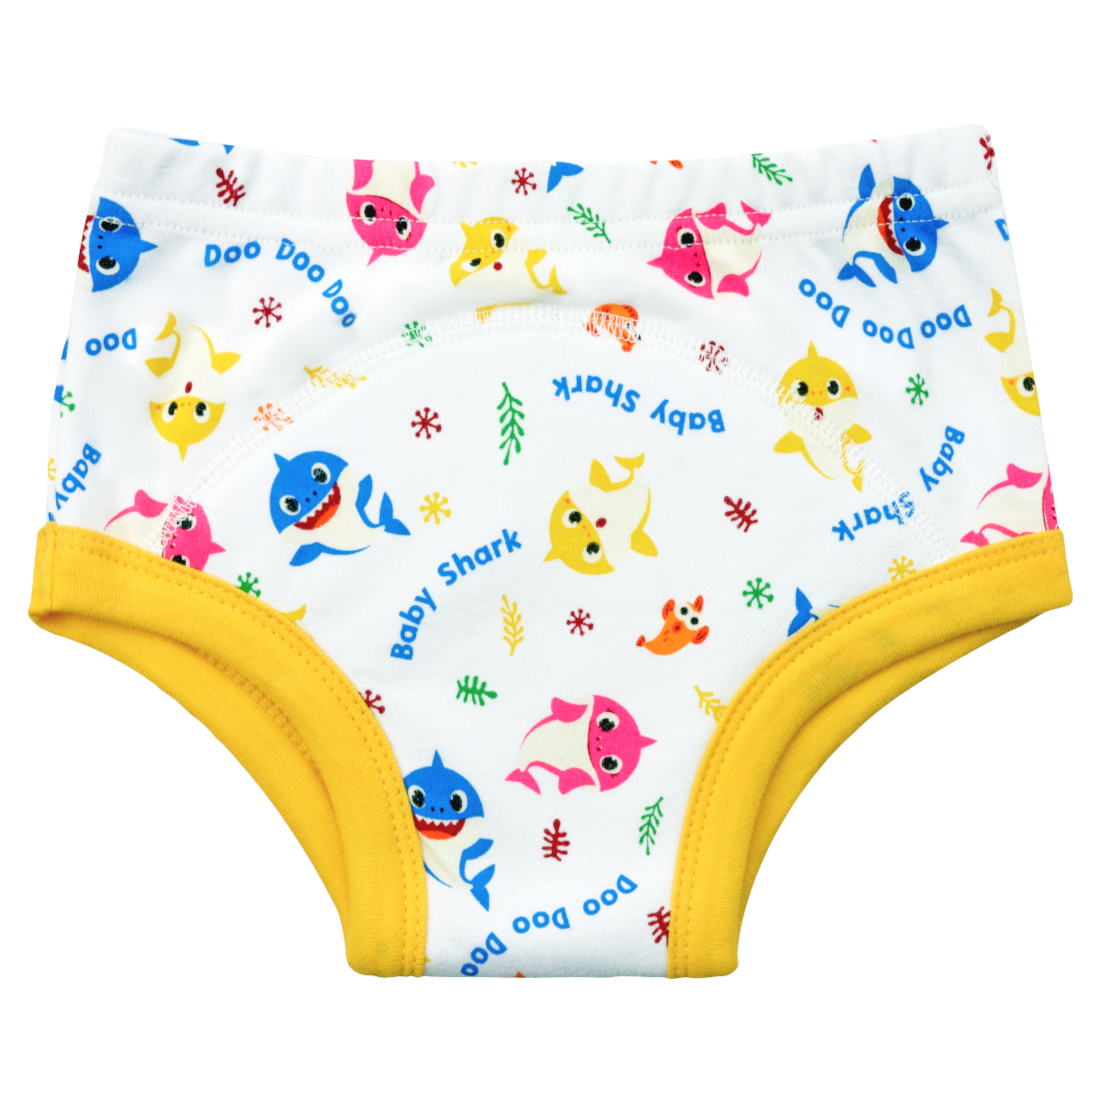 Baby Shark Trainer Pants at Toys R Us UK